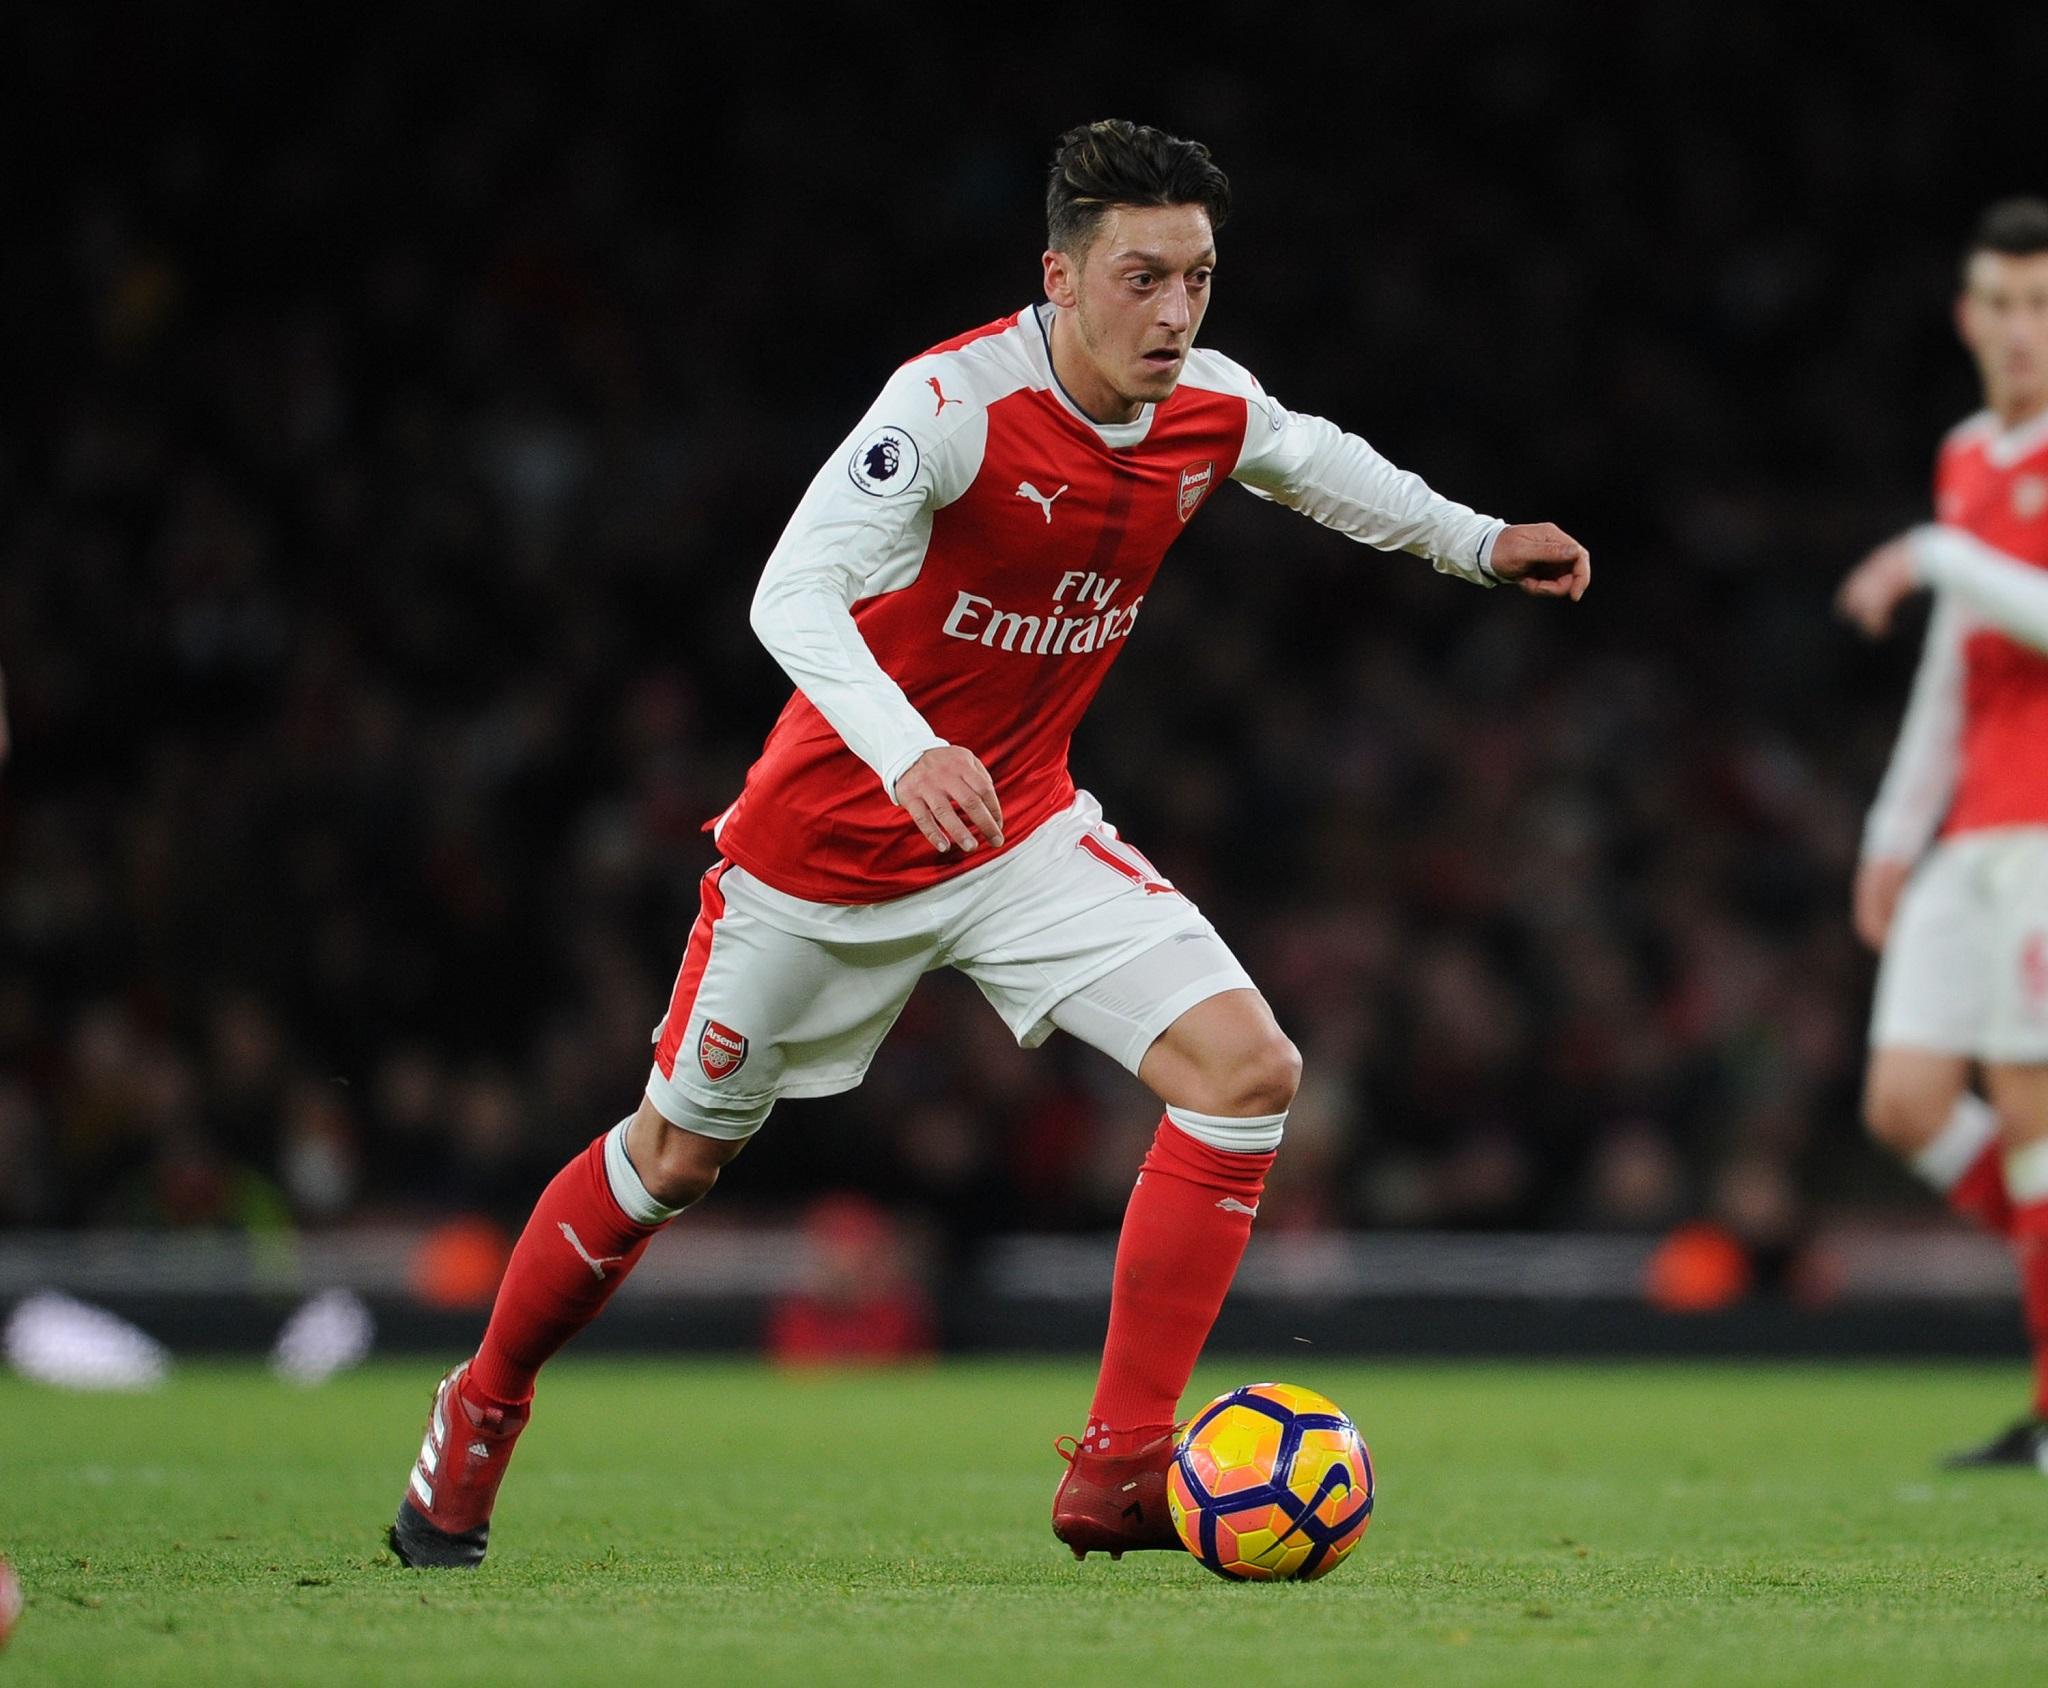 Arsenal vs Crystal Palace preview What time does it start, what channel is it on and where can I watch it? The Independent The Independent